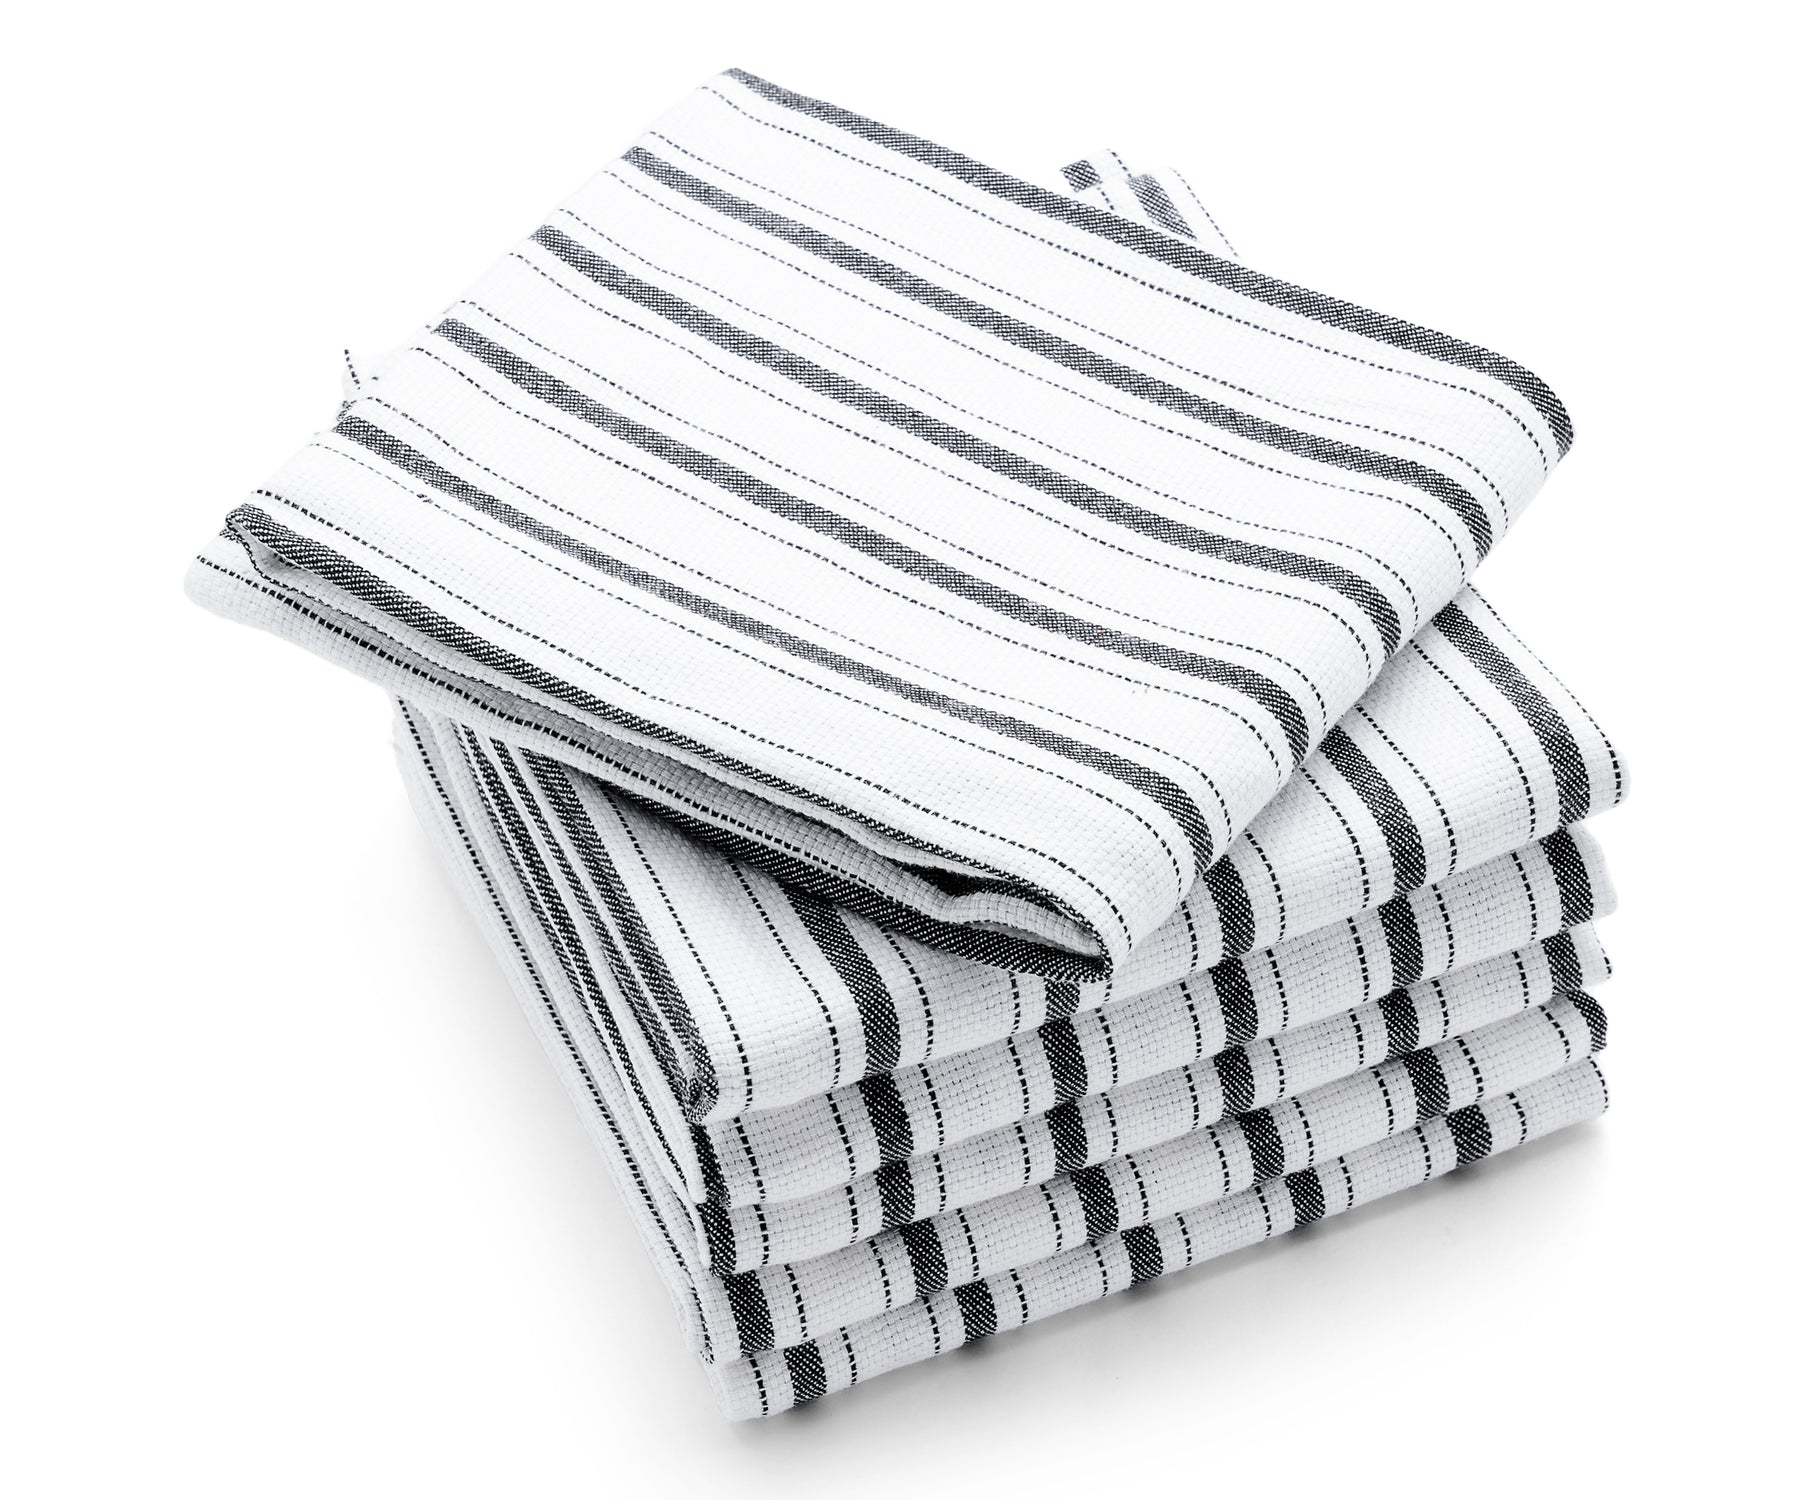 Dish towels set of 6, black and white striped dish towels cotton, drying dish towels, dish cloths and dish towels.